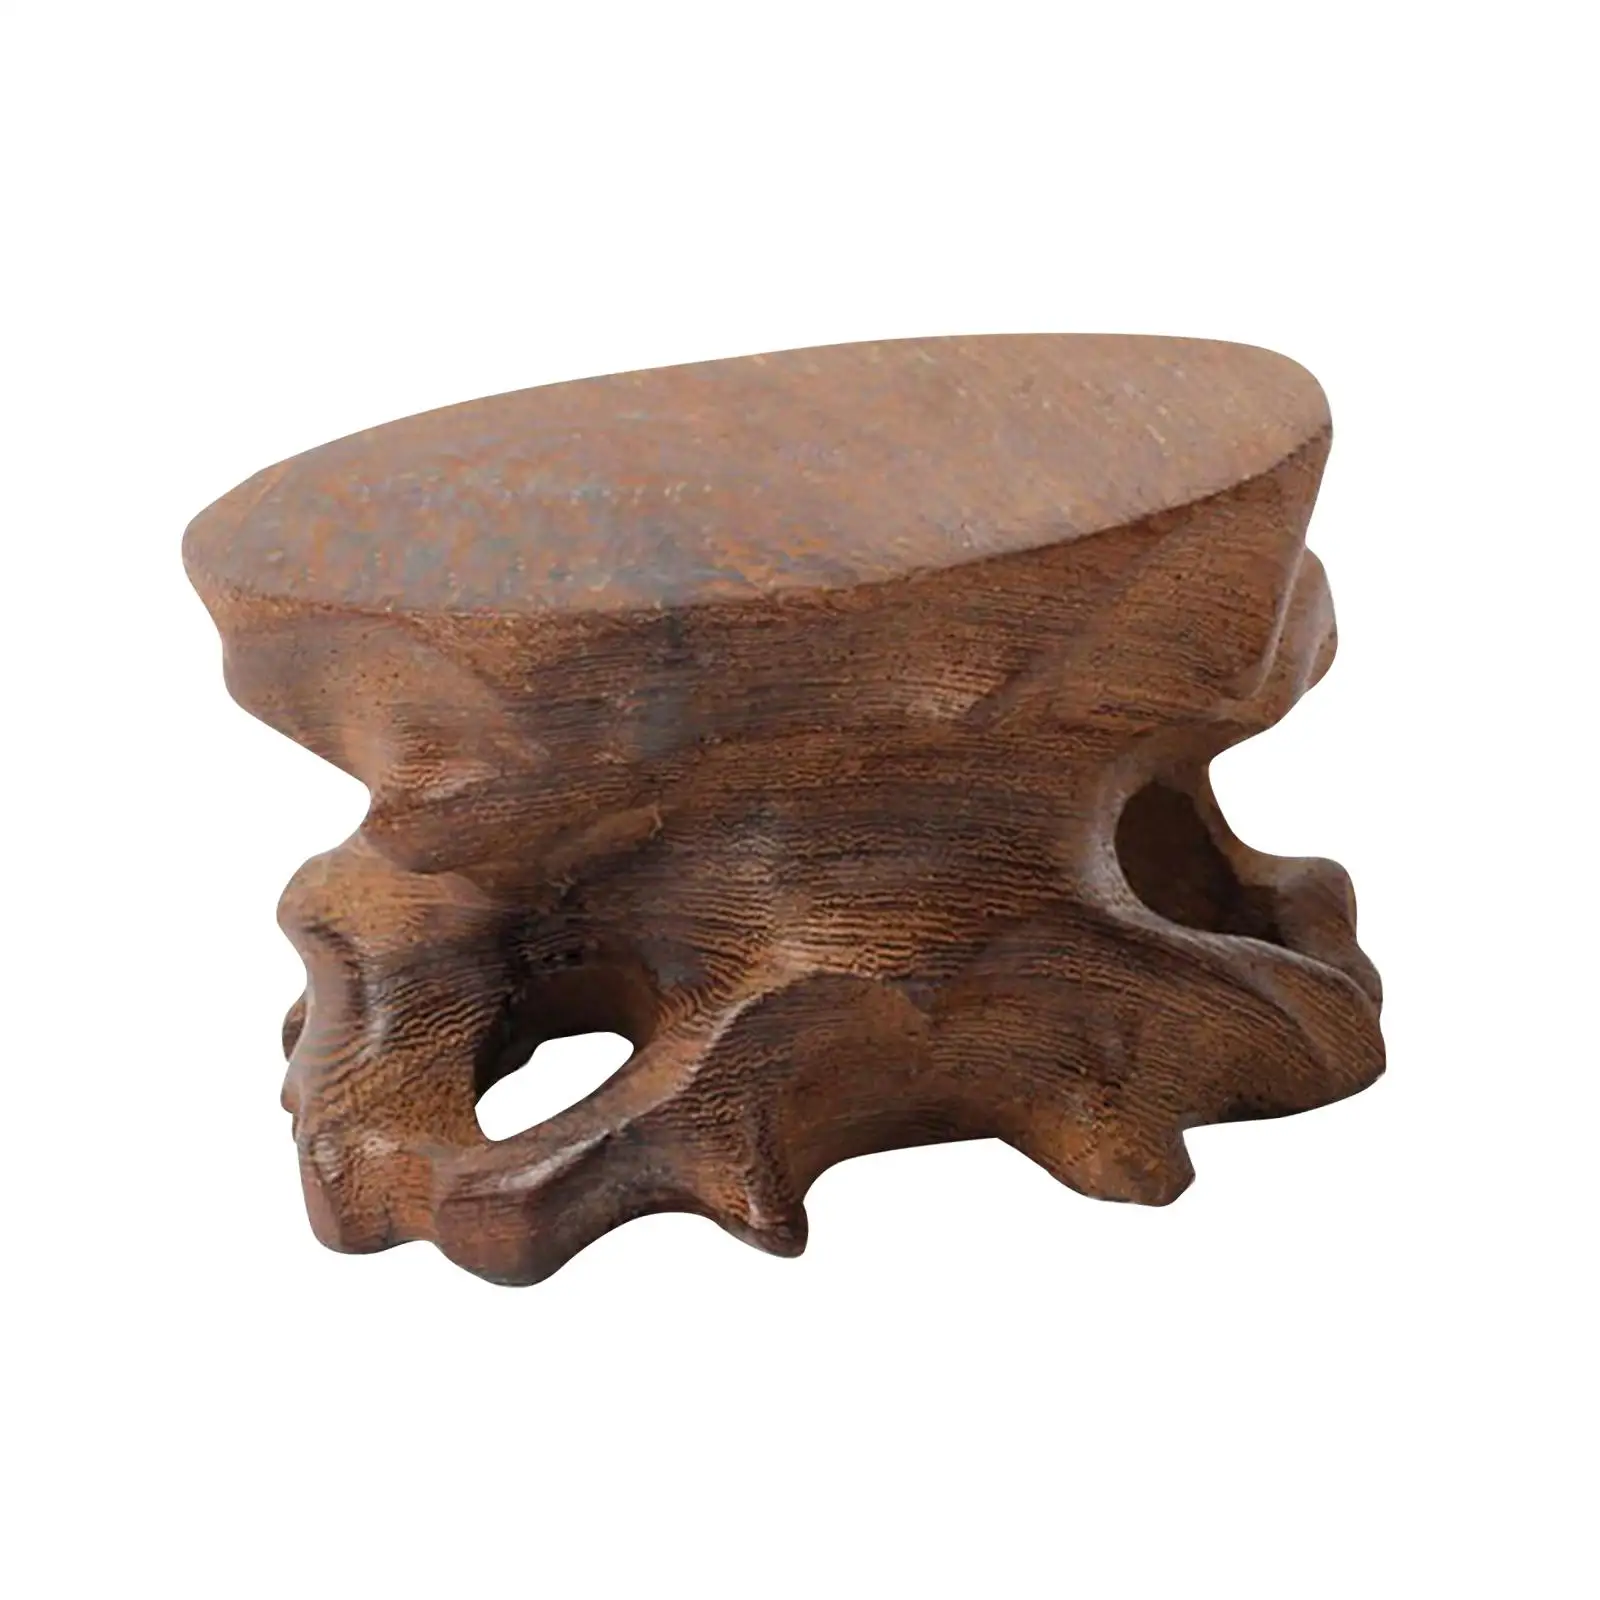 Wooden Stone Display Base Teapot Base Small Decorative Base Vase Base Display Stand Wood Decorative Base for Living Room Home